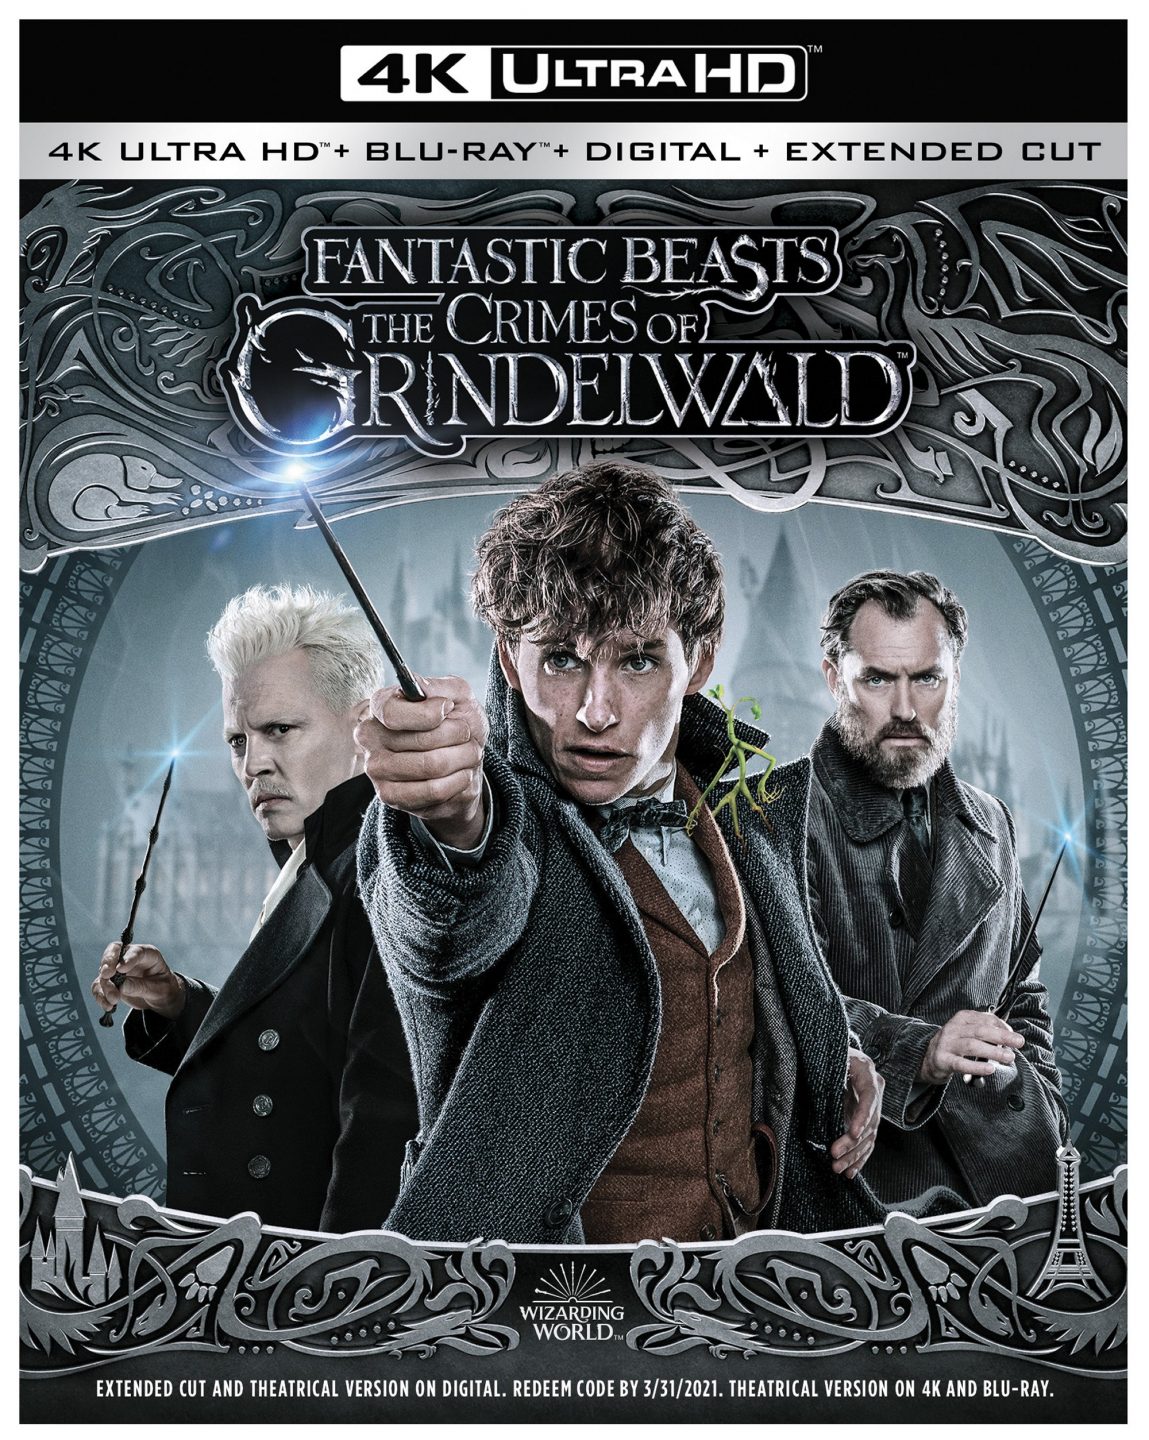 Fantastic Beasts: The Crimes Of Grindelwald 4K Ultra HD Combo Pack cover (Warner Bros. Home Entertainment)